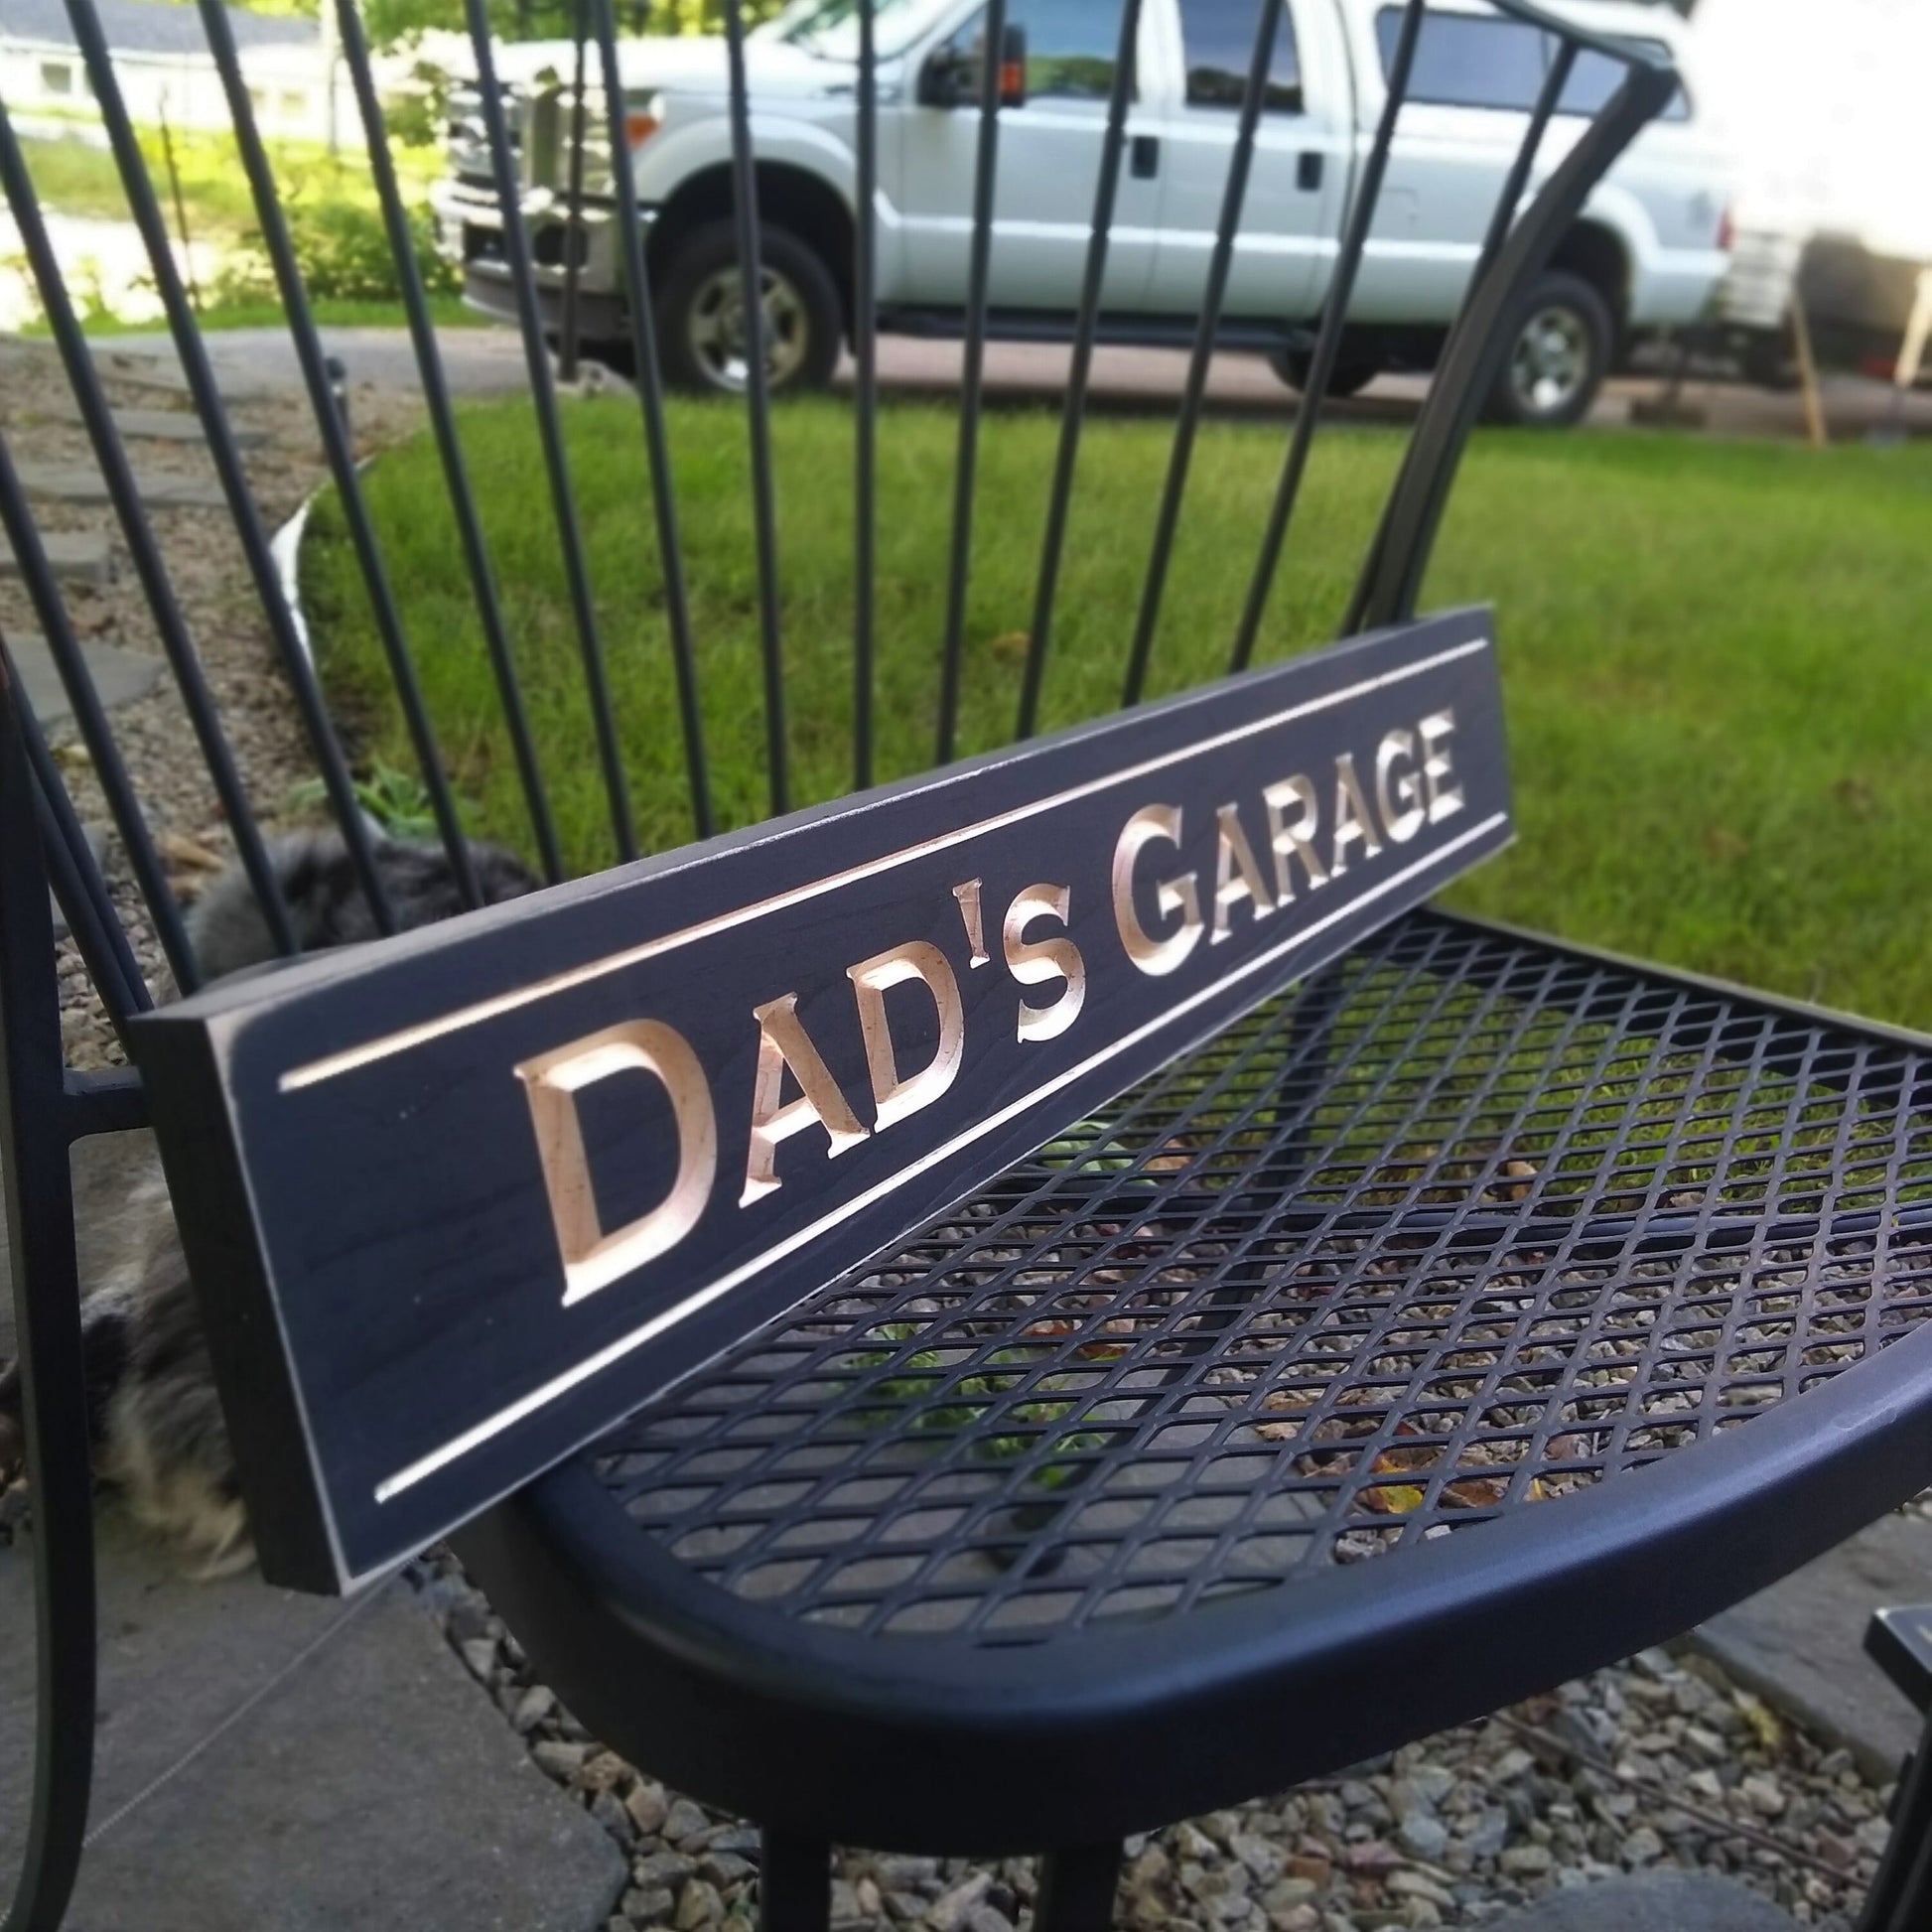 personalized wood sign,Dad's Garage, Custom wooden signs, workshop sign, Father's Day gift